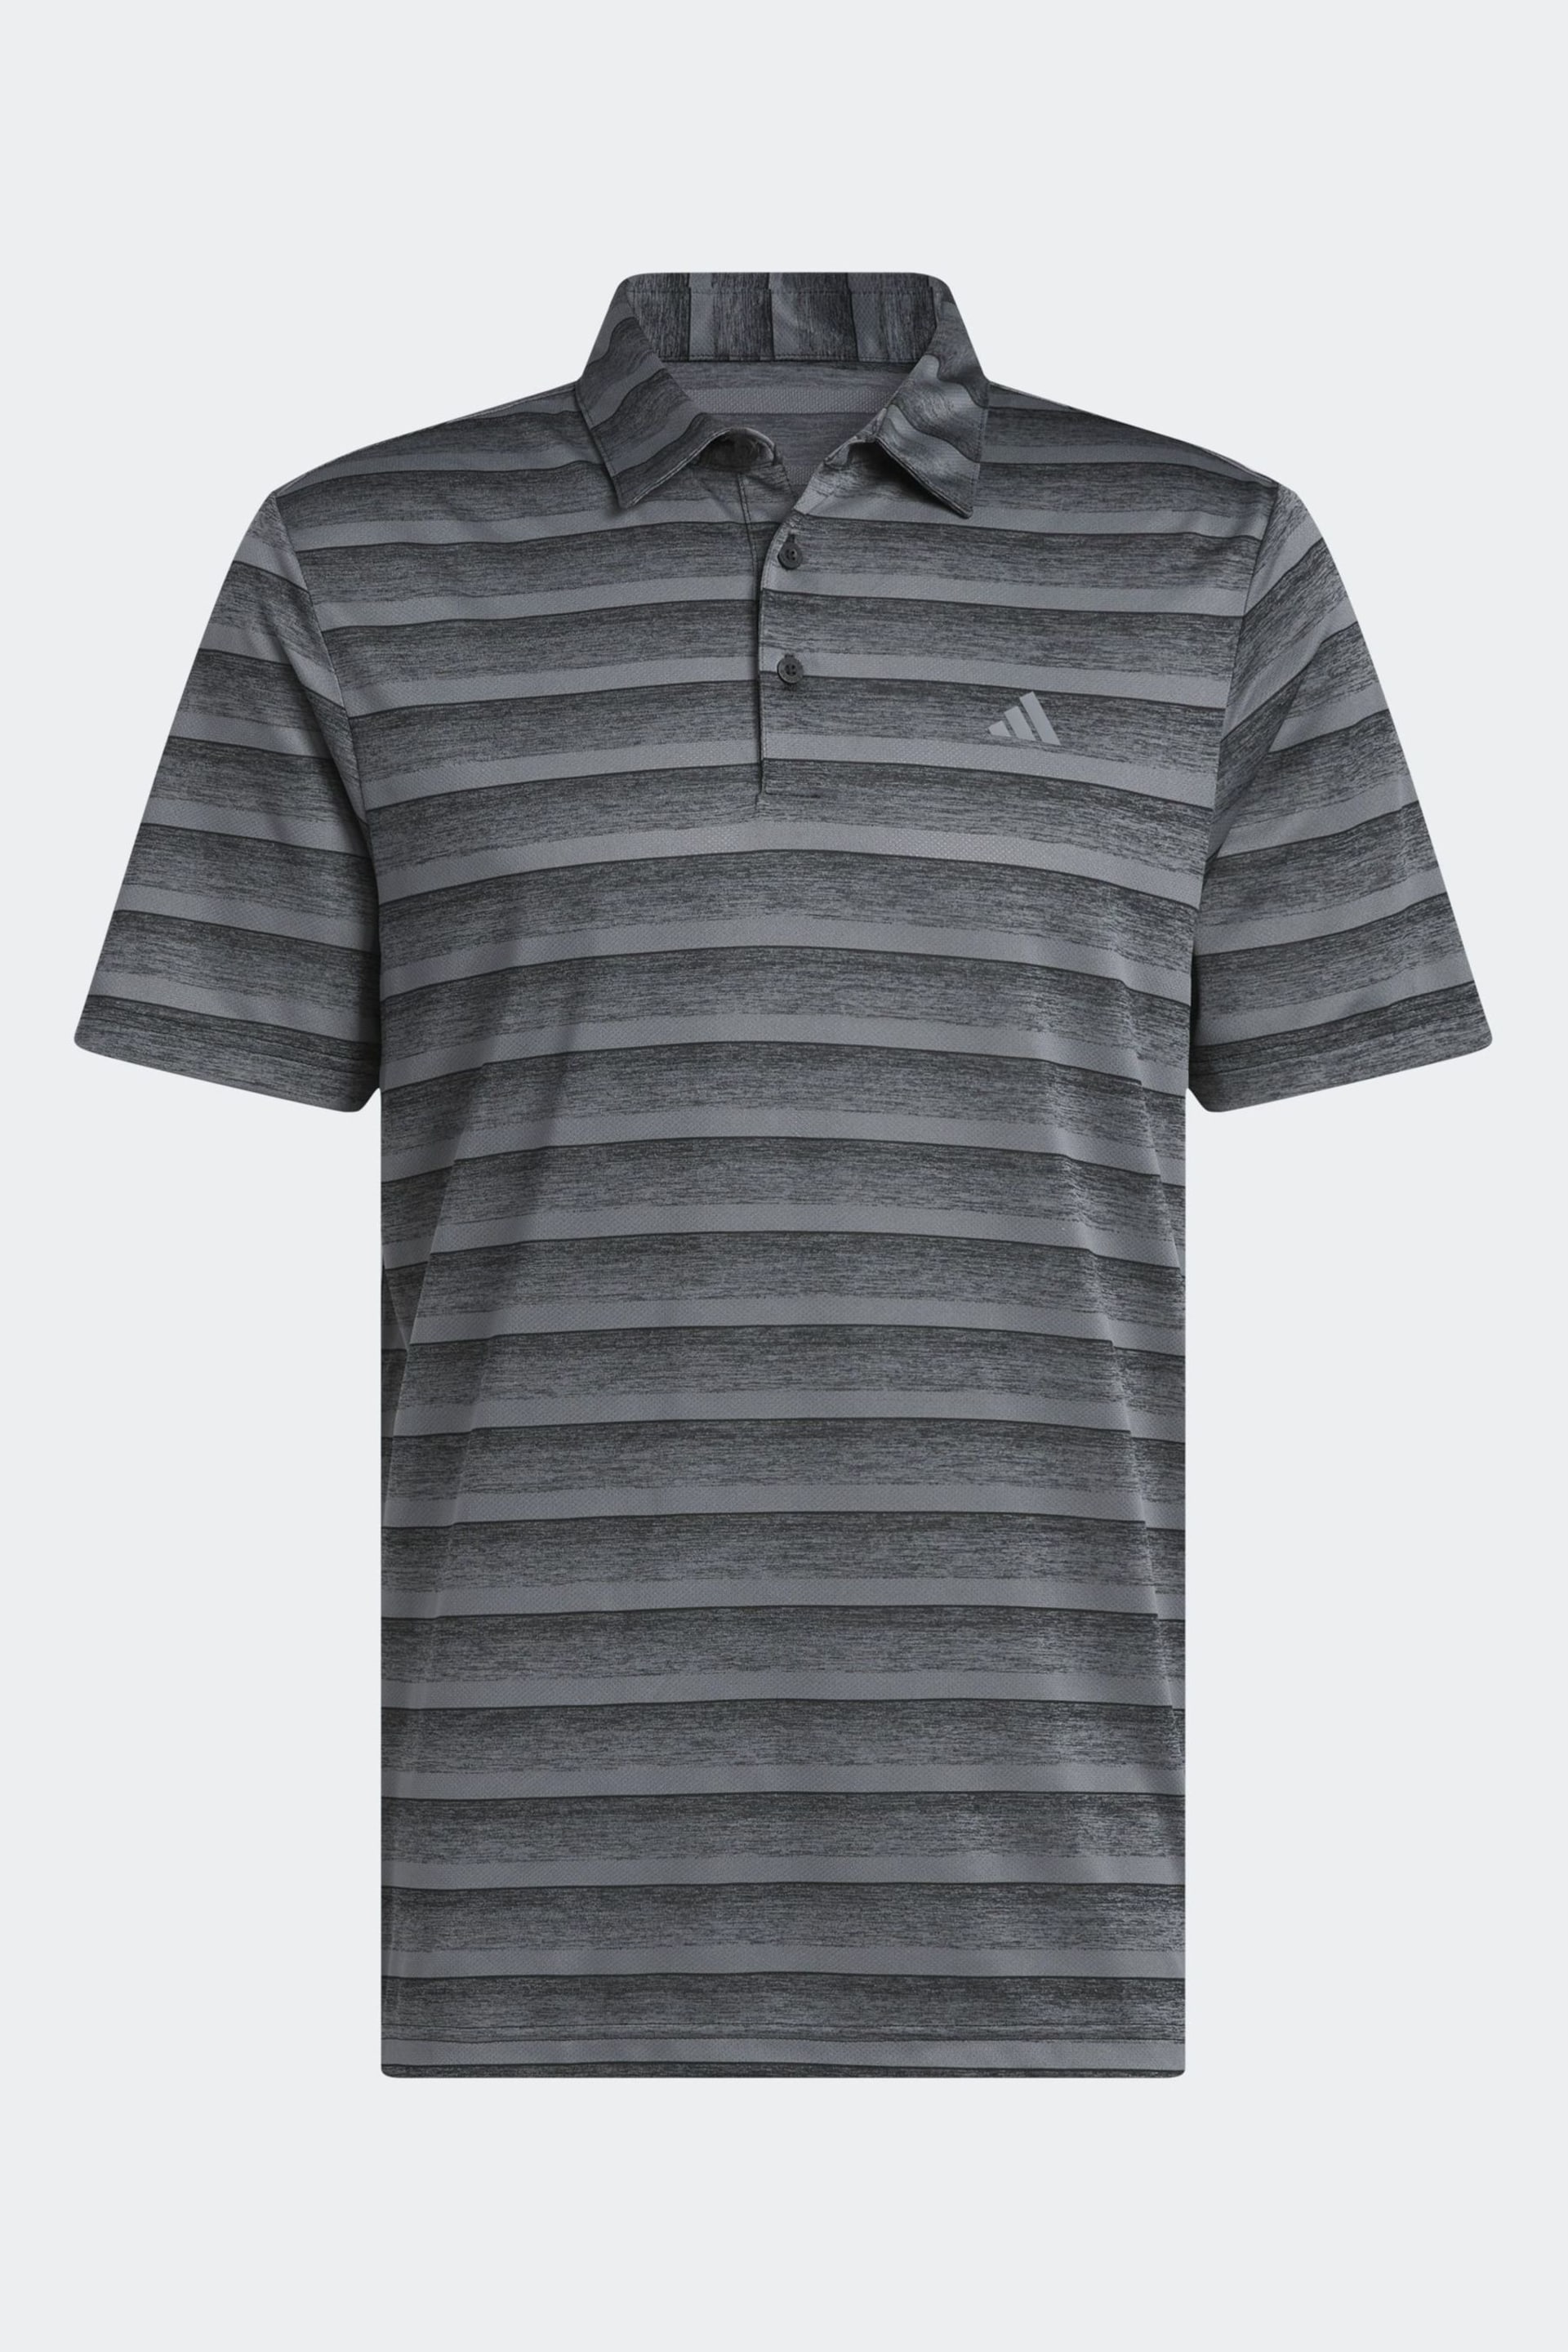 adidas Golf Two Colour Striped Polo Shirt - Image 4 of 5